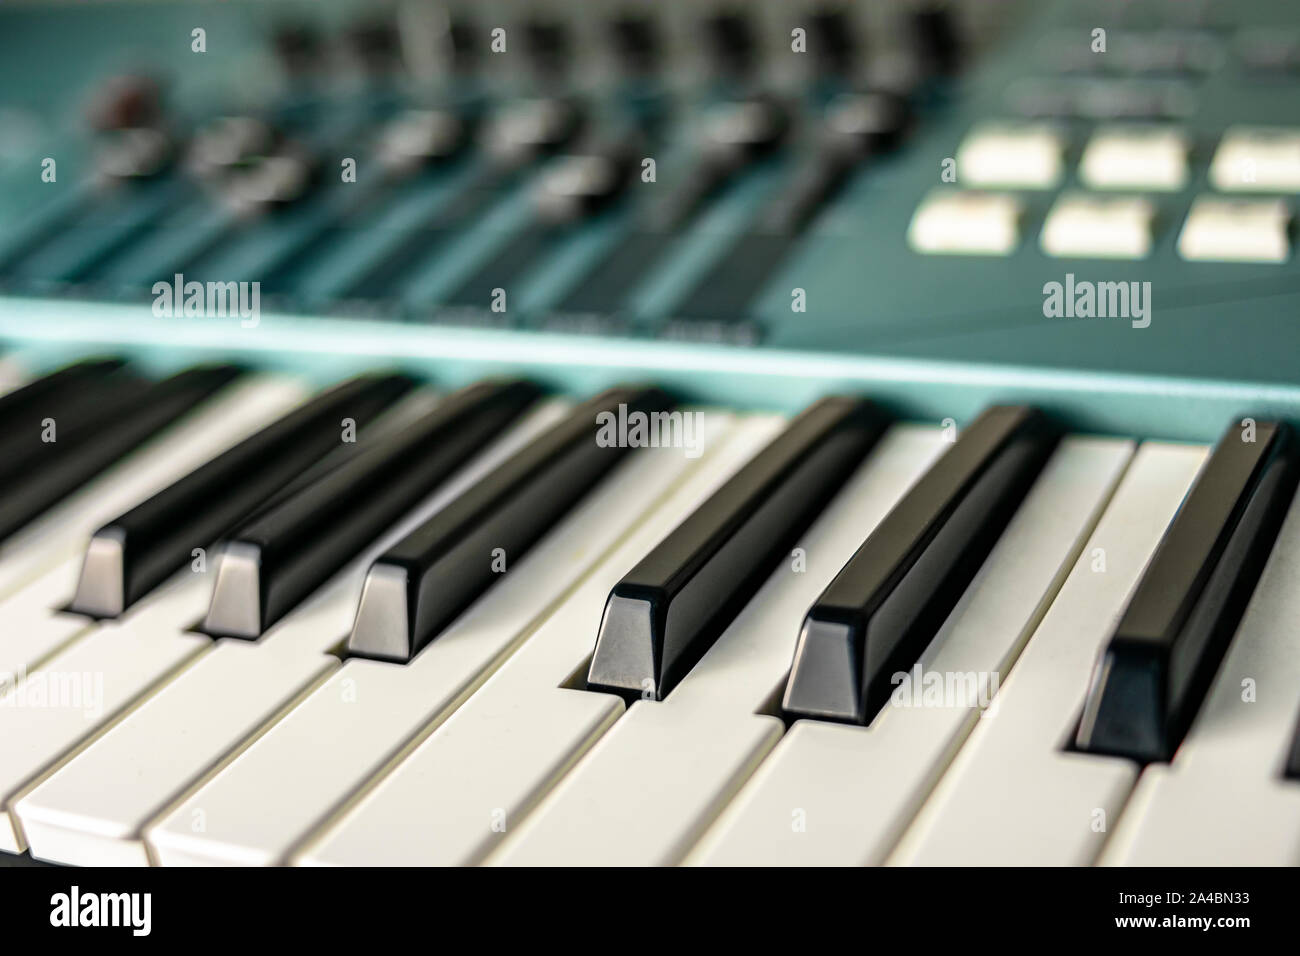 Close-up of the natural and sustained keys of a stage keyboard or piano, along with control keypads and faders Stock Photo